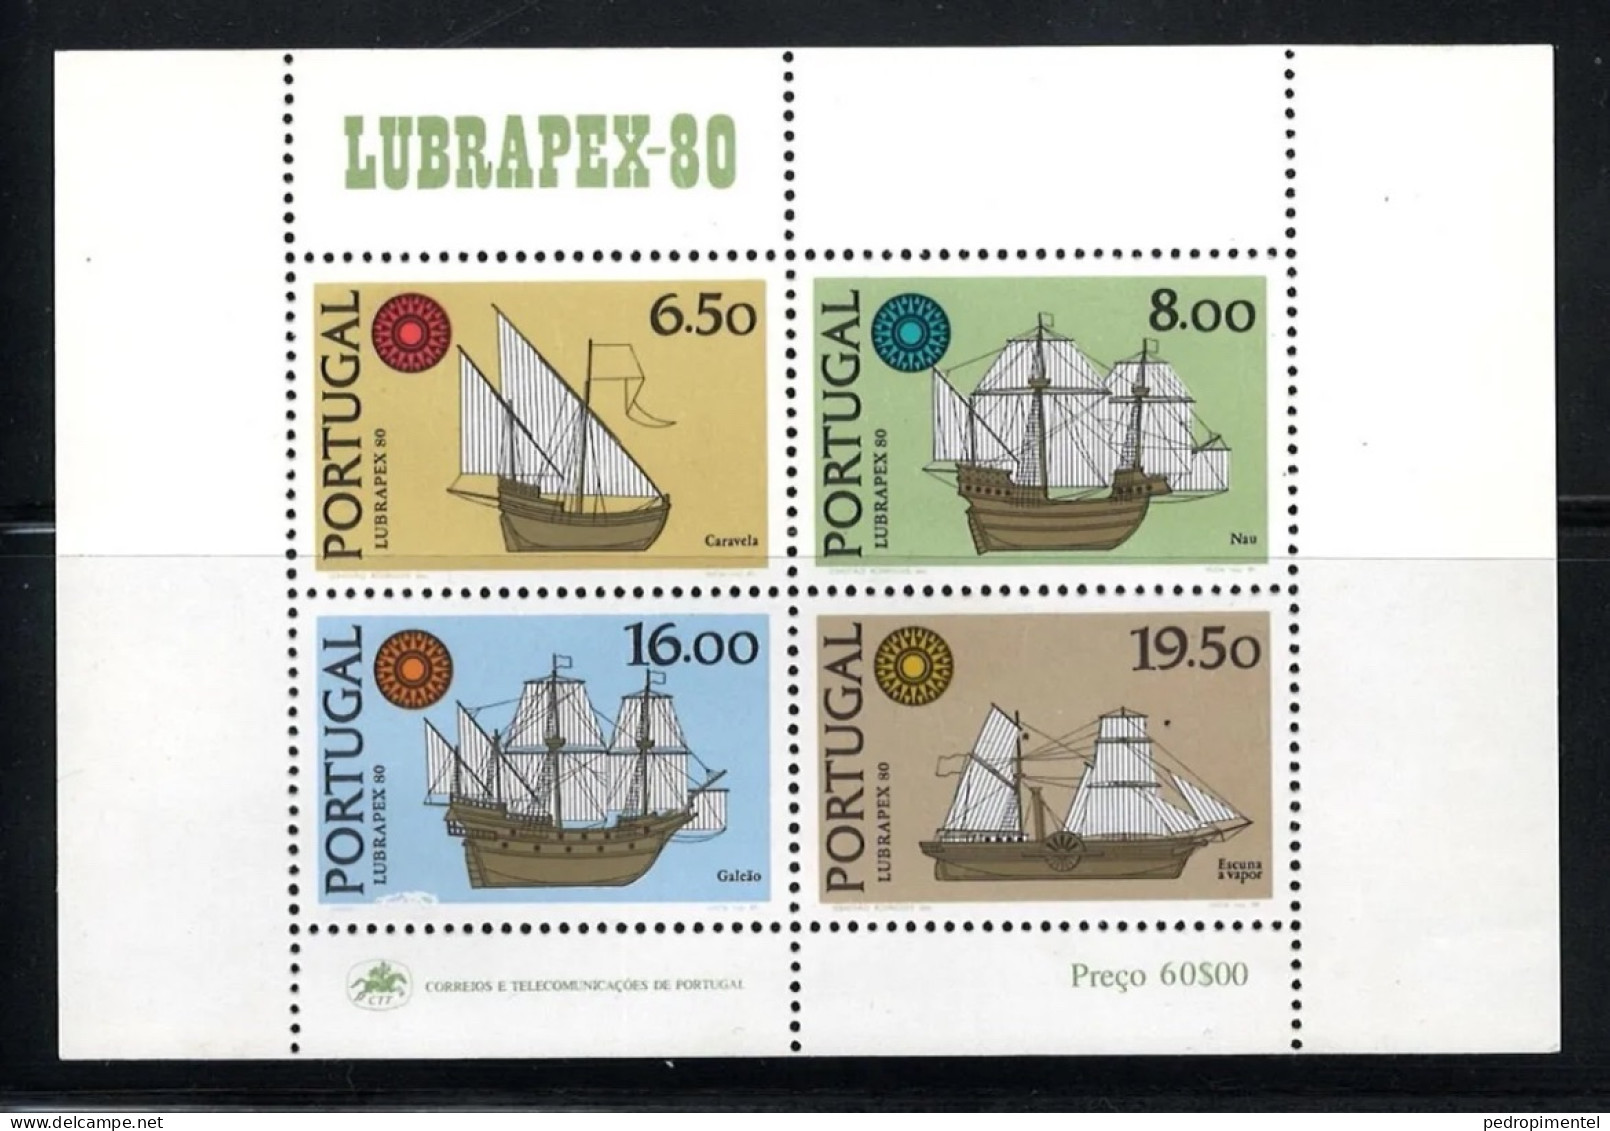 Portugal Stamps 1980 "Lubrapex 80" Condition MNH #1492-1495 (minisheet+stamps) - Nuovi